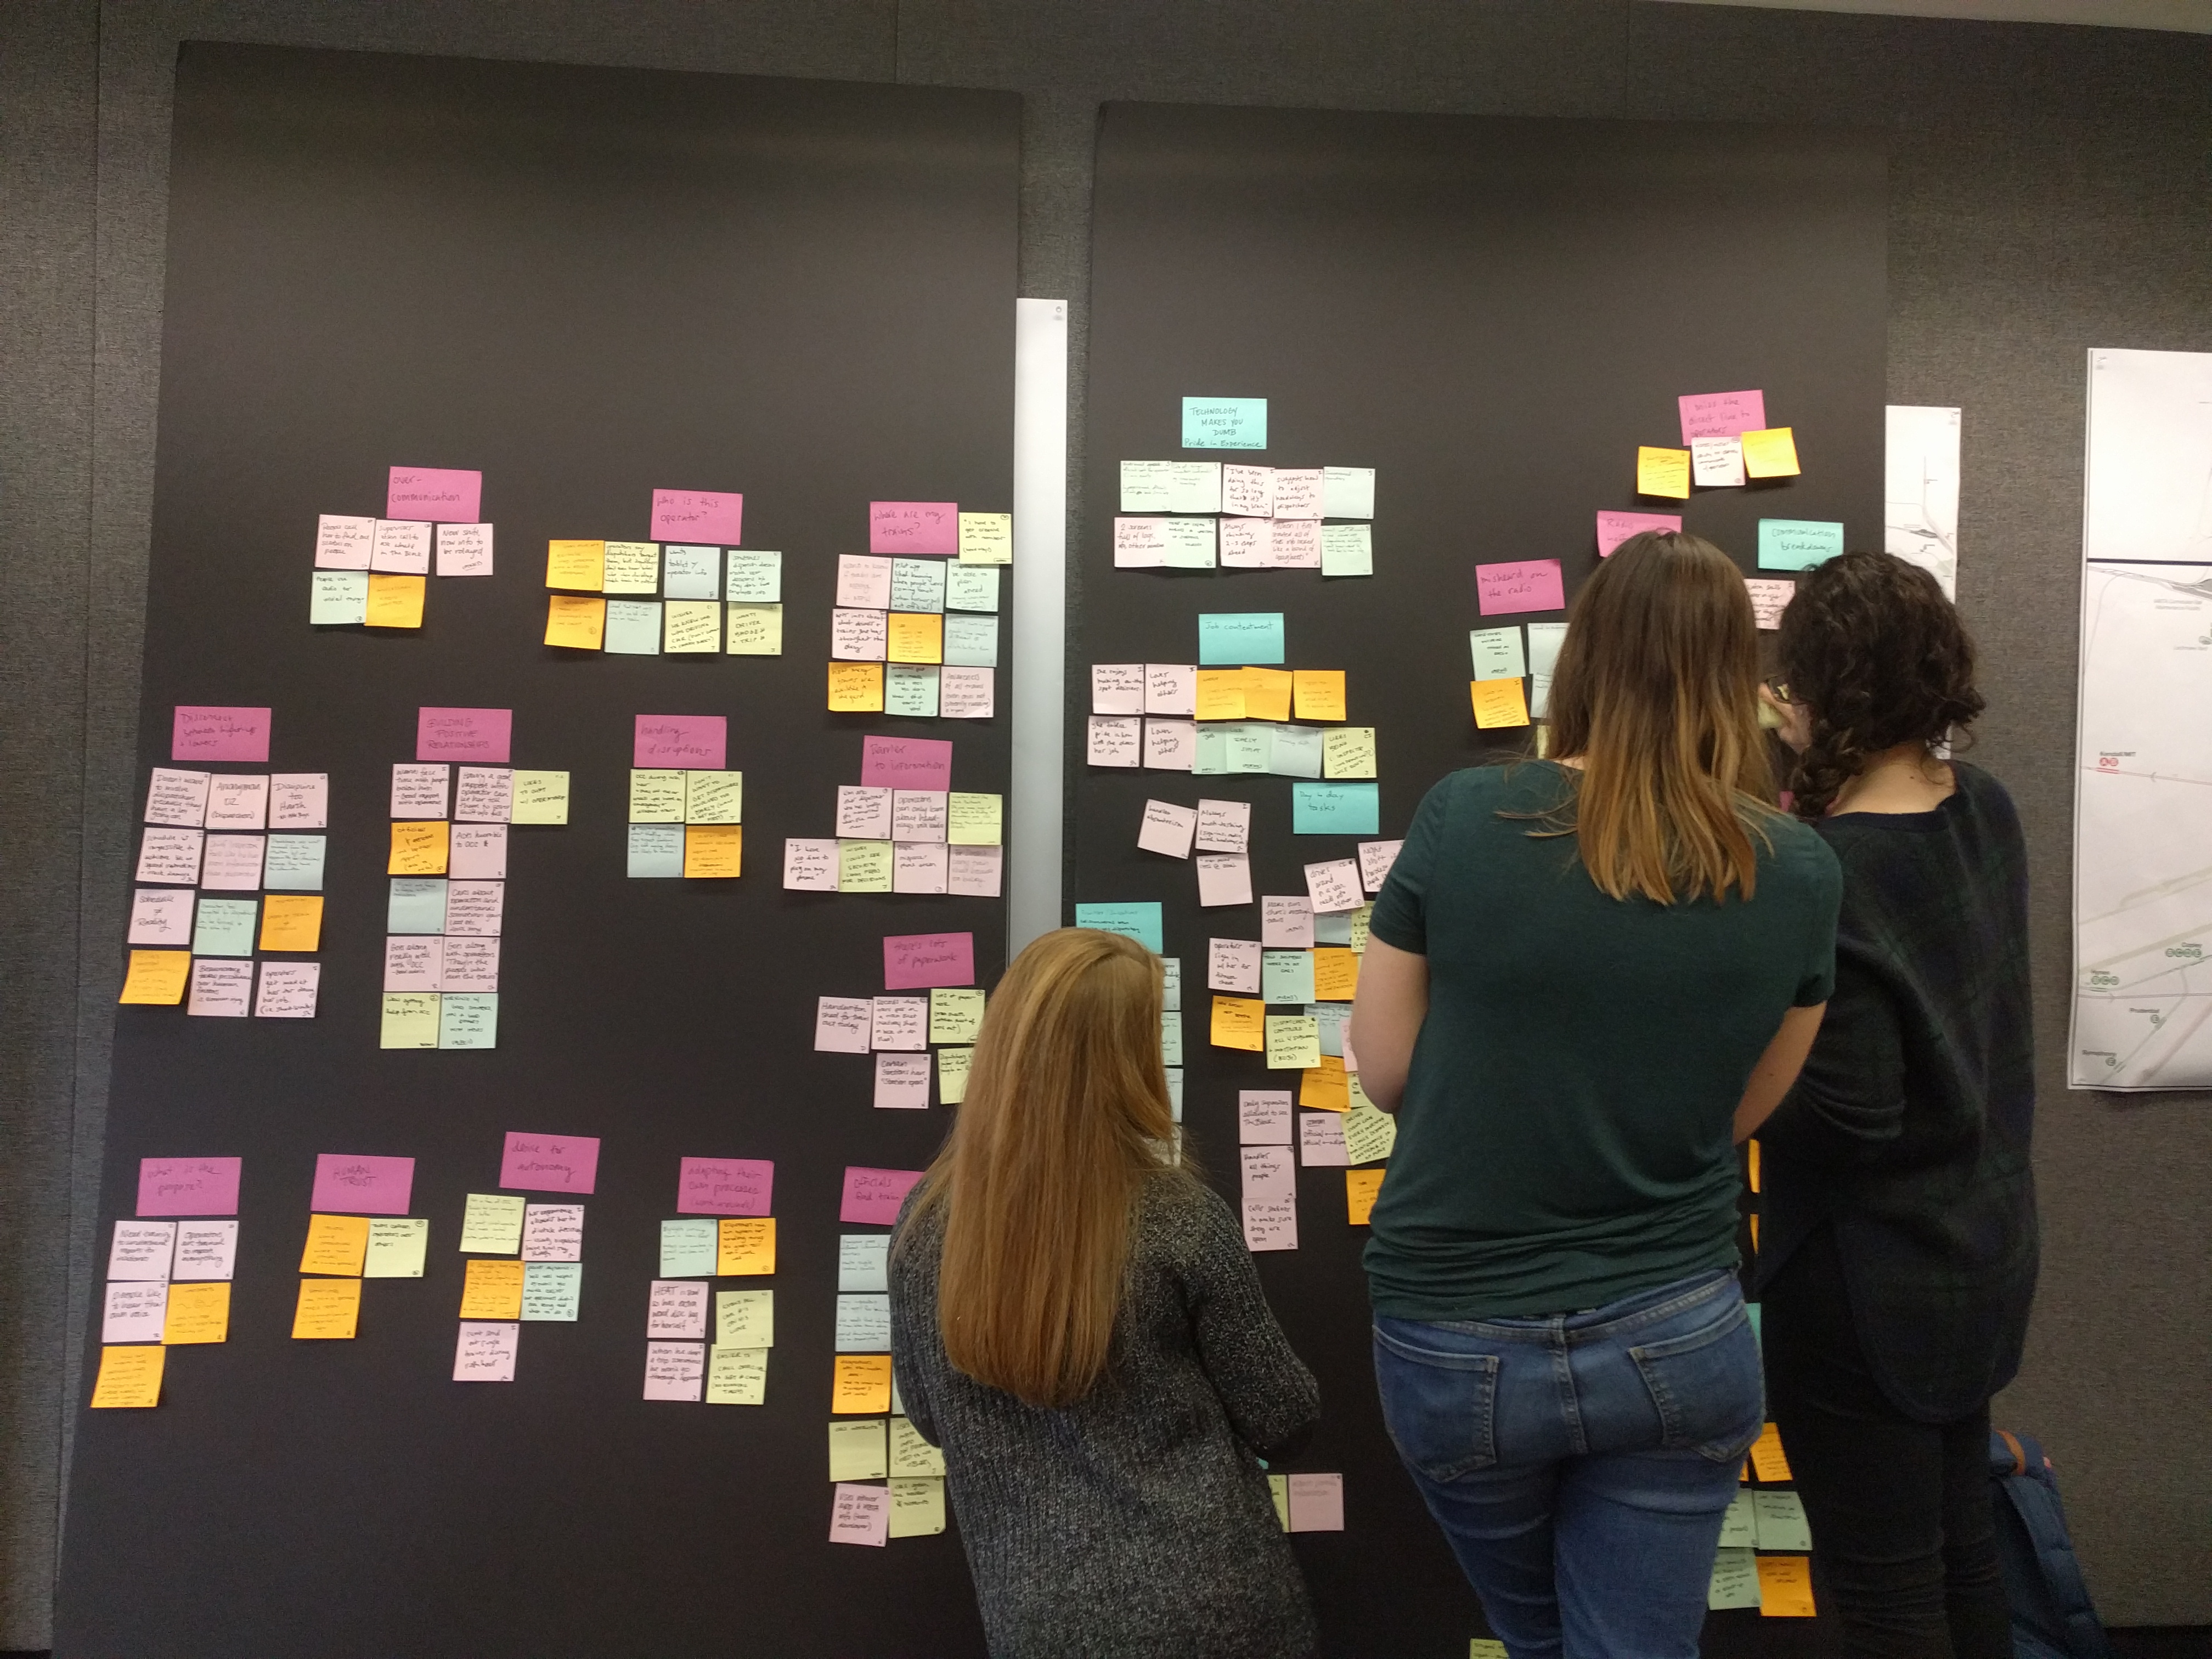 Three women in front of a large wall full of post-it notes